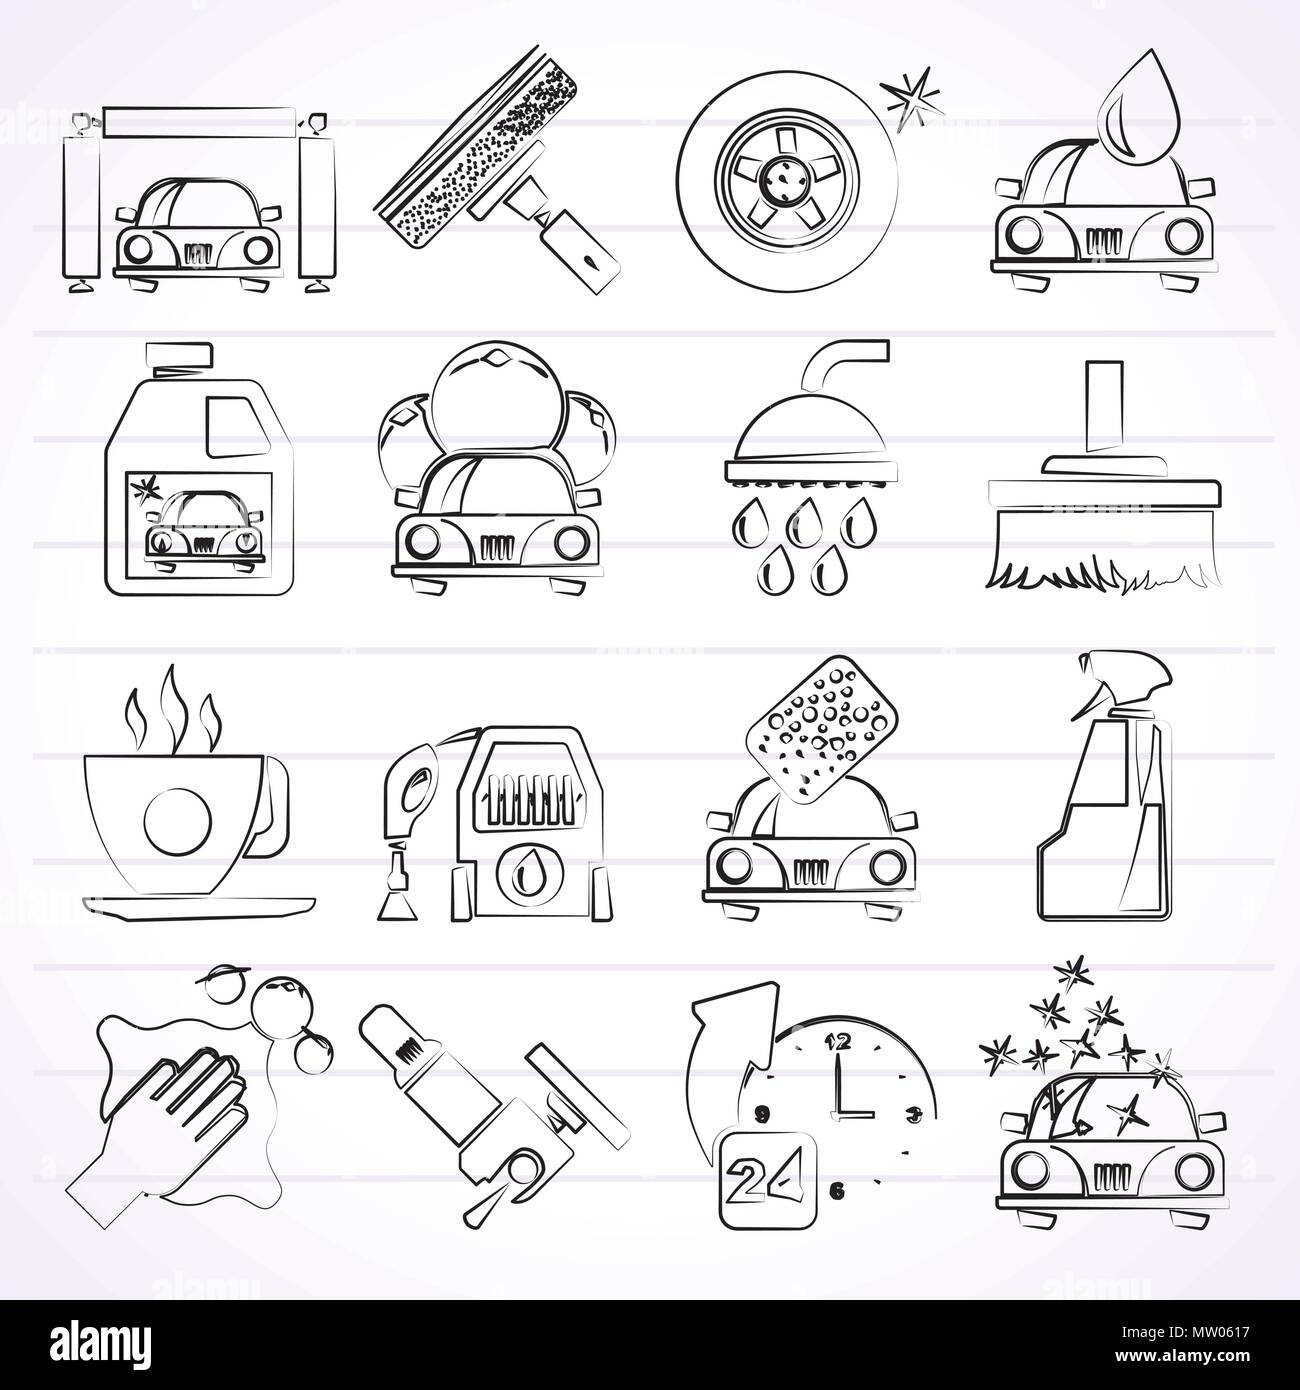 Professional car wash objects and icons - vector icon set Stock Vector